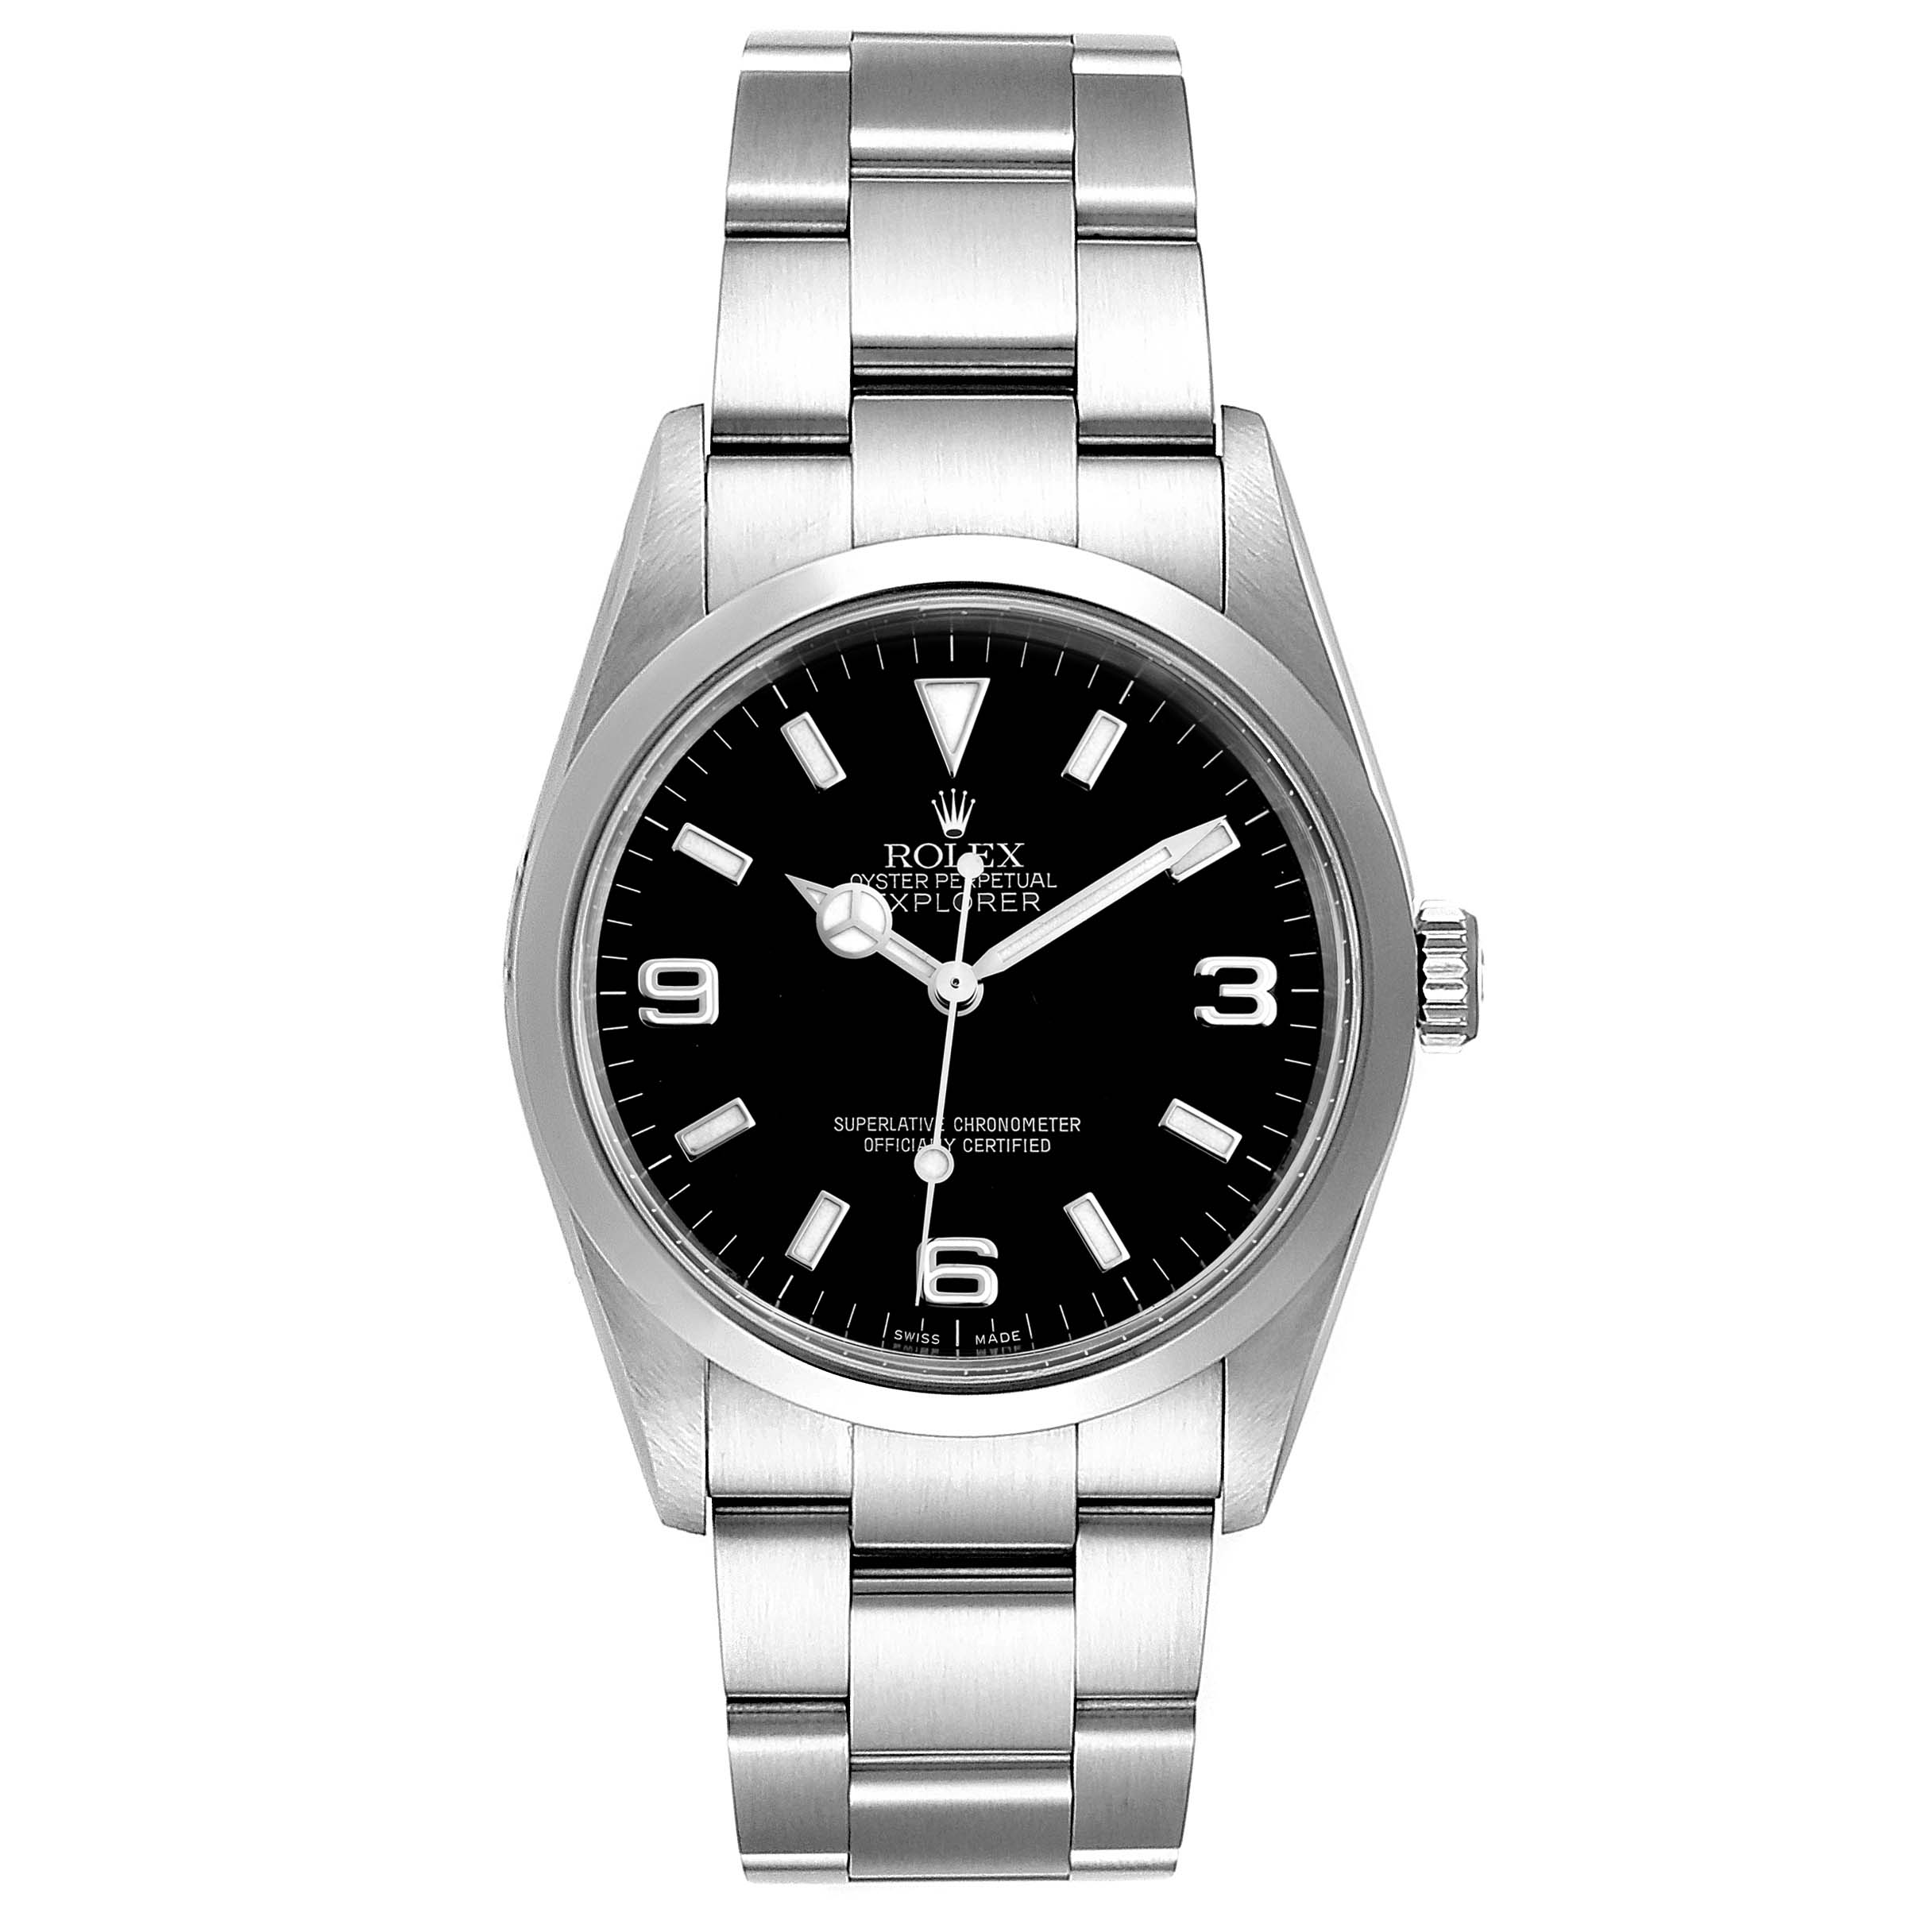 Rolex Explorer I Black Dial Stainless Steel Mens Watch 114270 Box Card ...